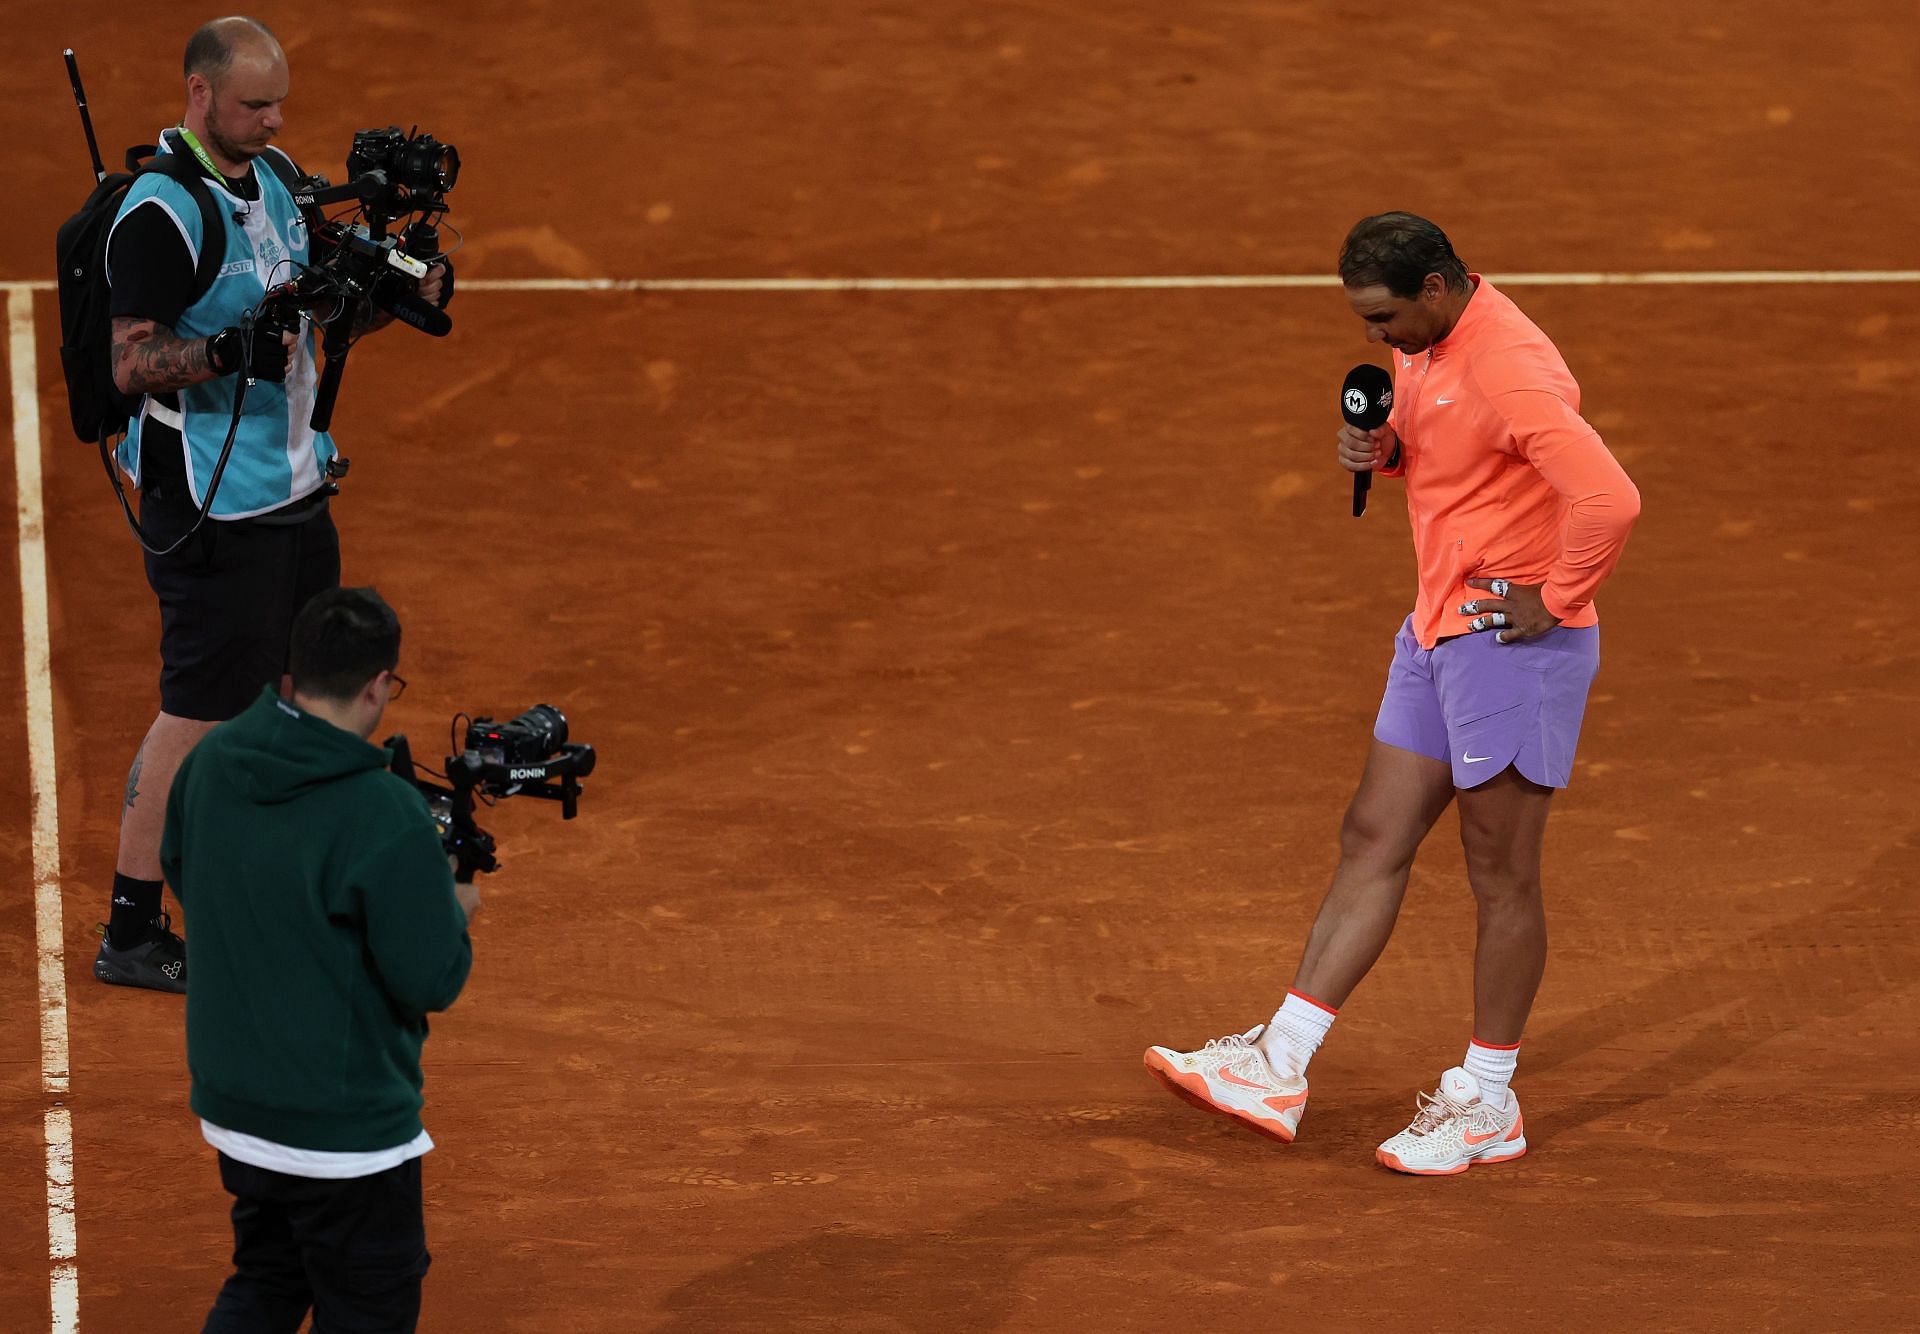 Rafael Nadal addressing the crowd after his last Madrid Open match